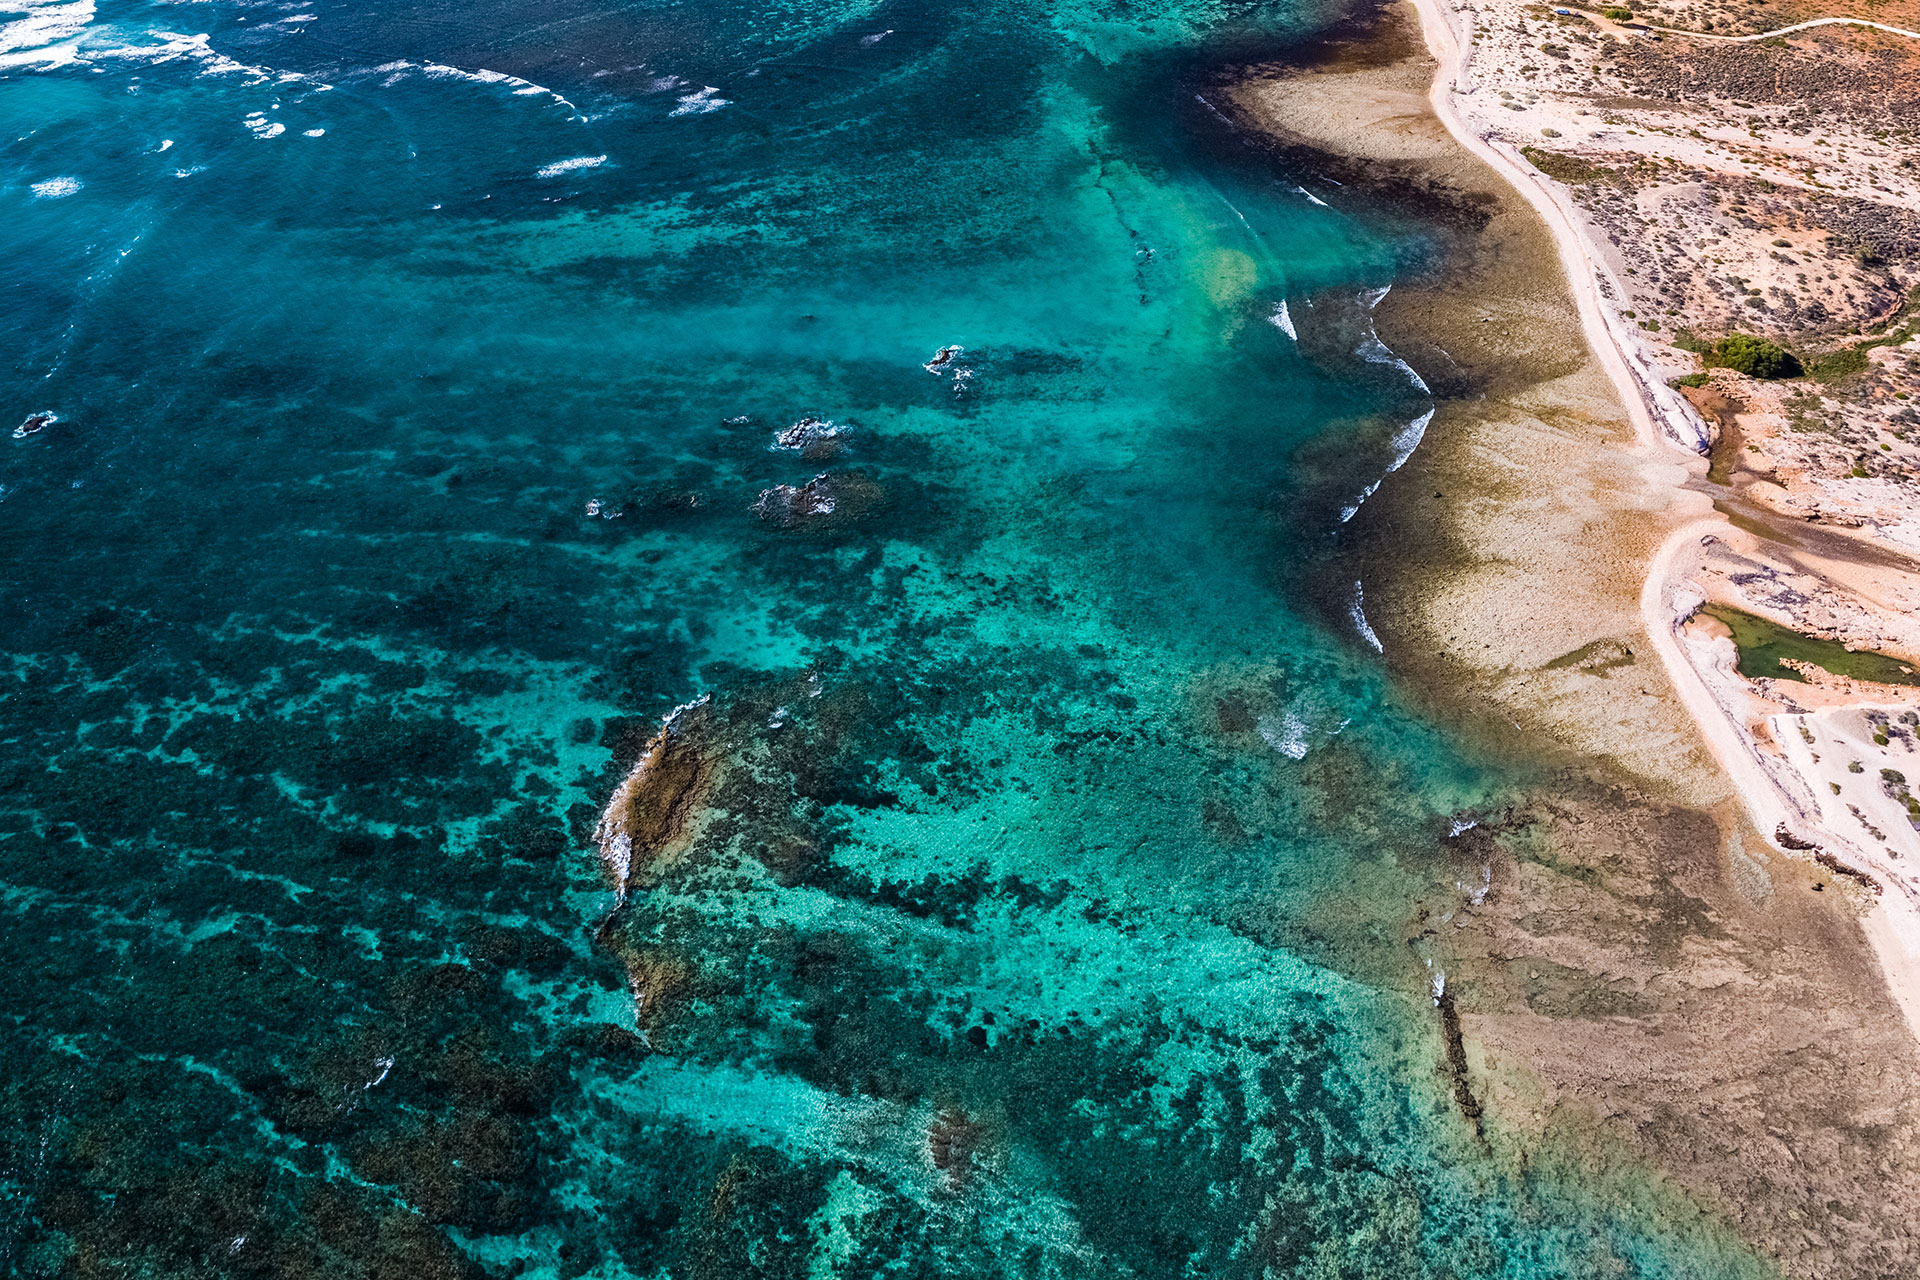 Get a bird’s eye view of the world-famous Ningaloo Reef by booking a flight in a microlight aircraft. Photo credit: Tourism Western Australia